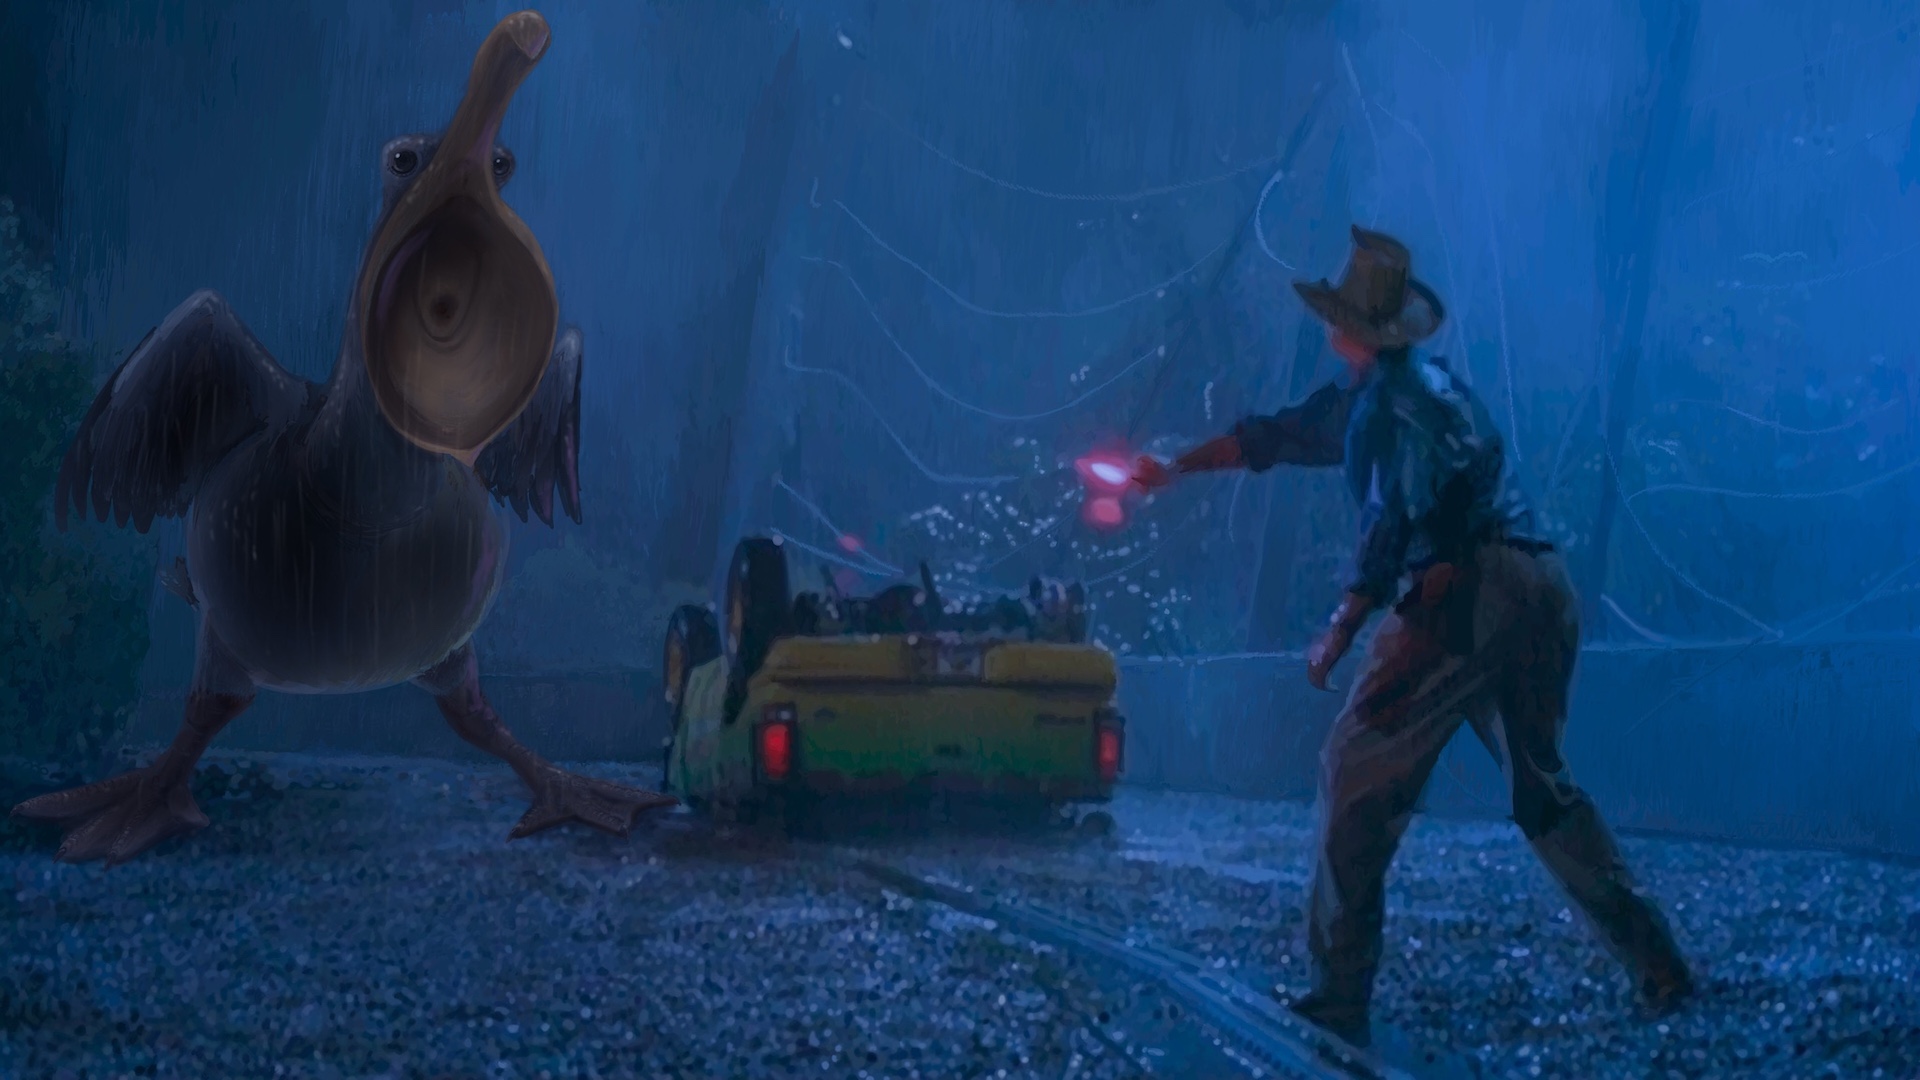 Digitally painted reproduction of of a frame from Jurassic Park, but instead of waving the emergency torch at a rampaging T-Rex, Alan is waving it at a giant pelican.